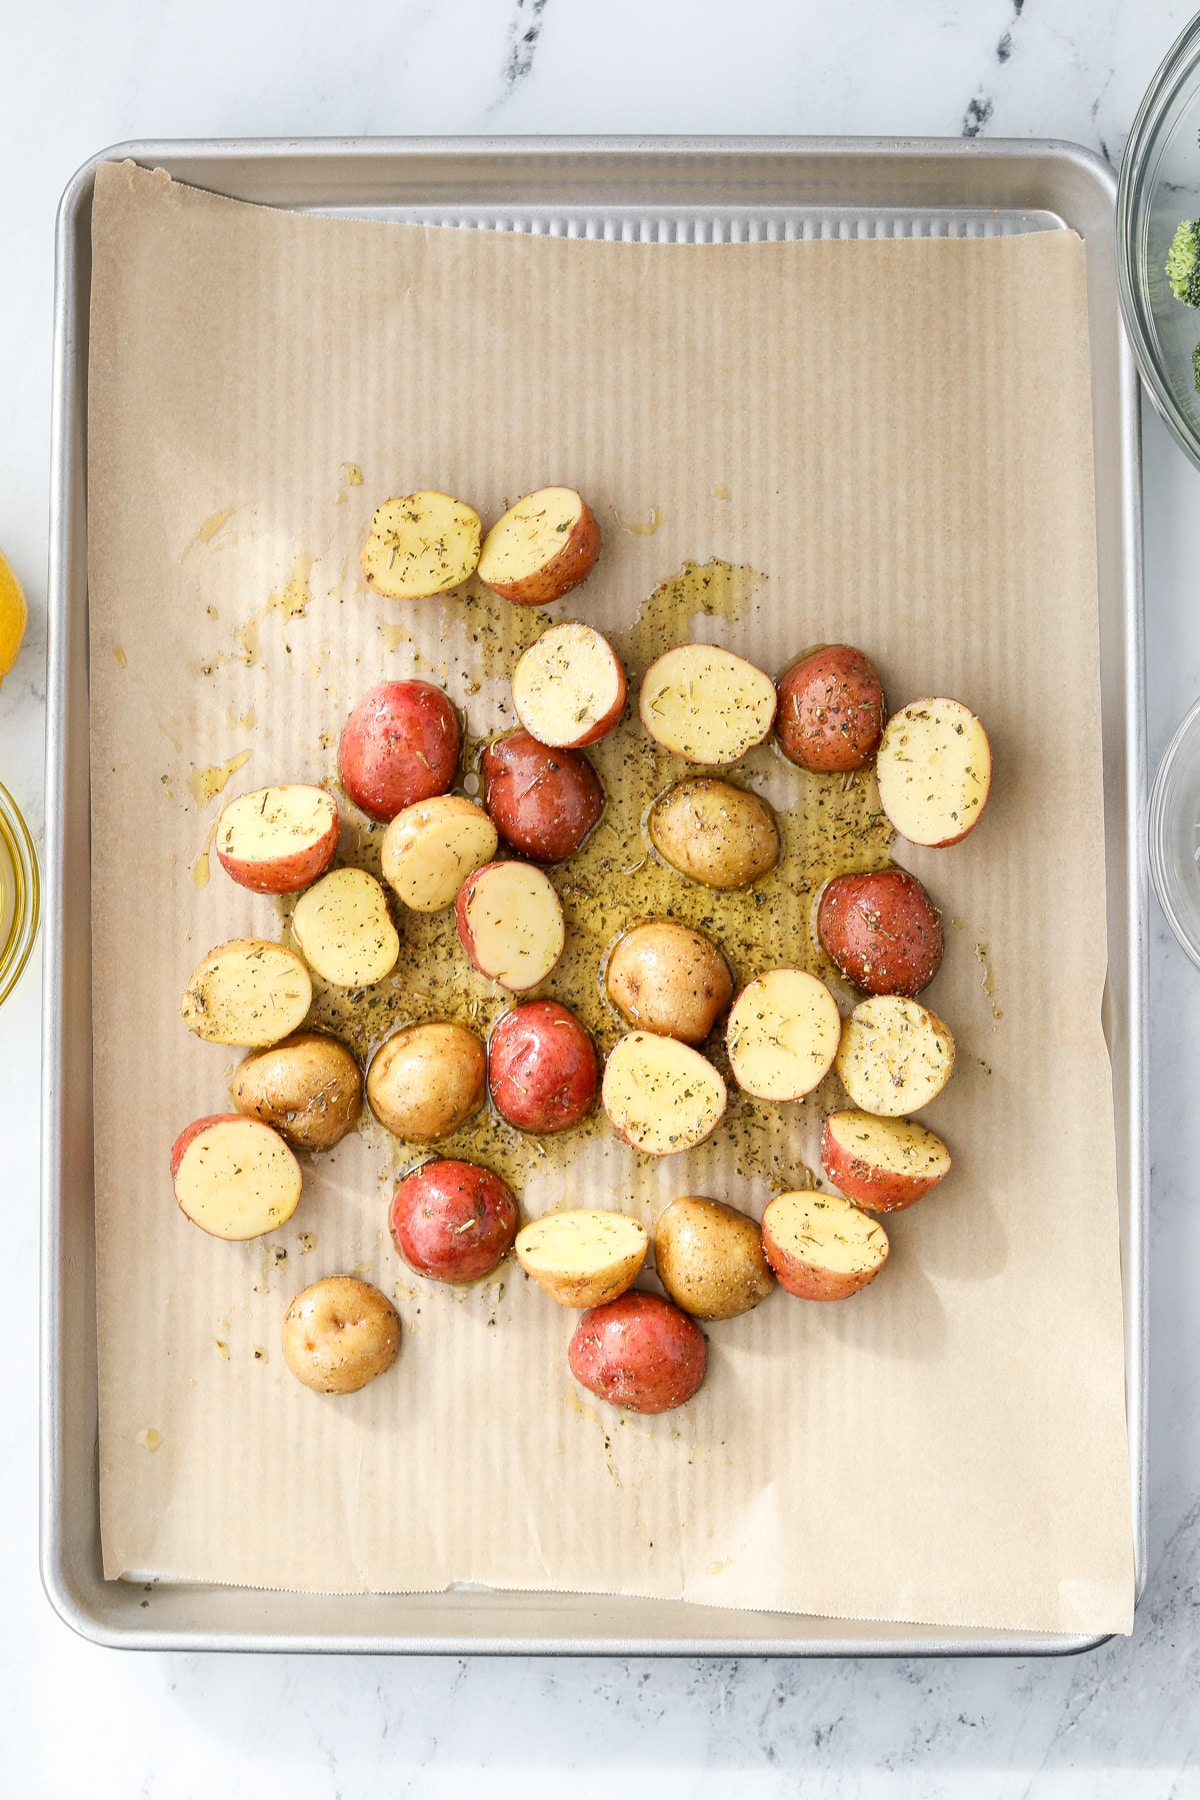 Spreading halved and oiled baby potatoes onto a baking sheet.